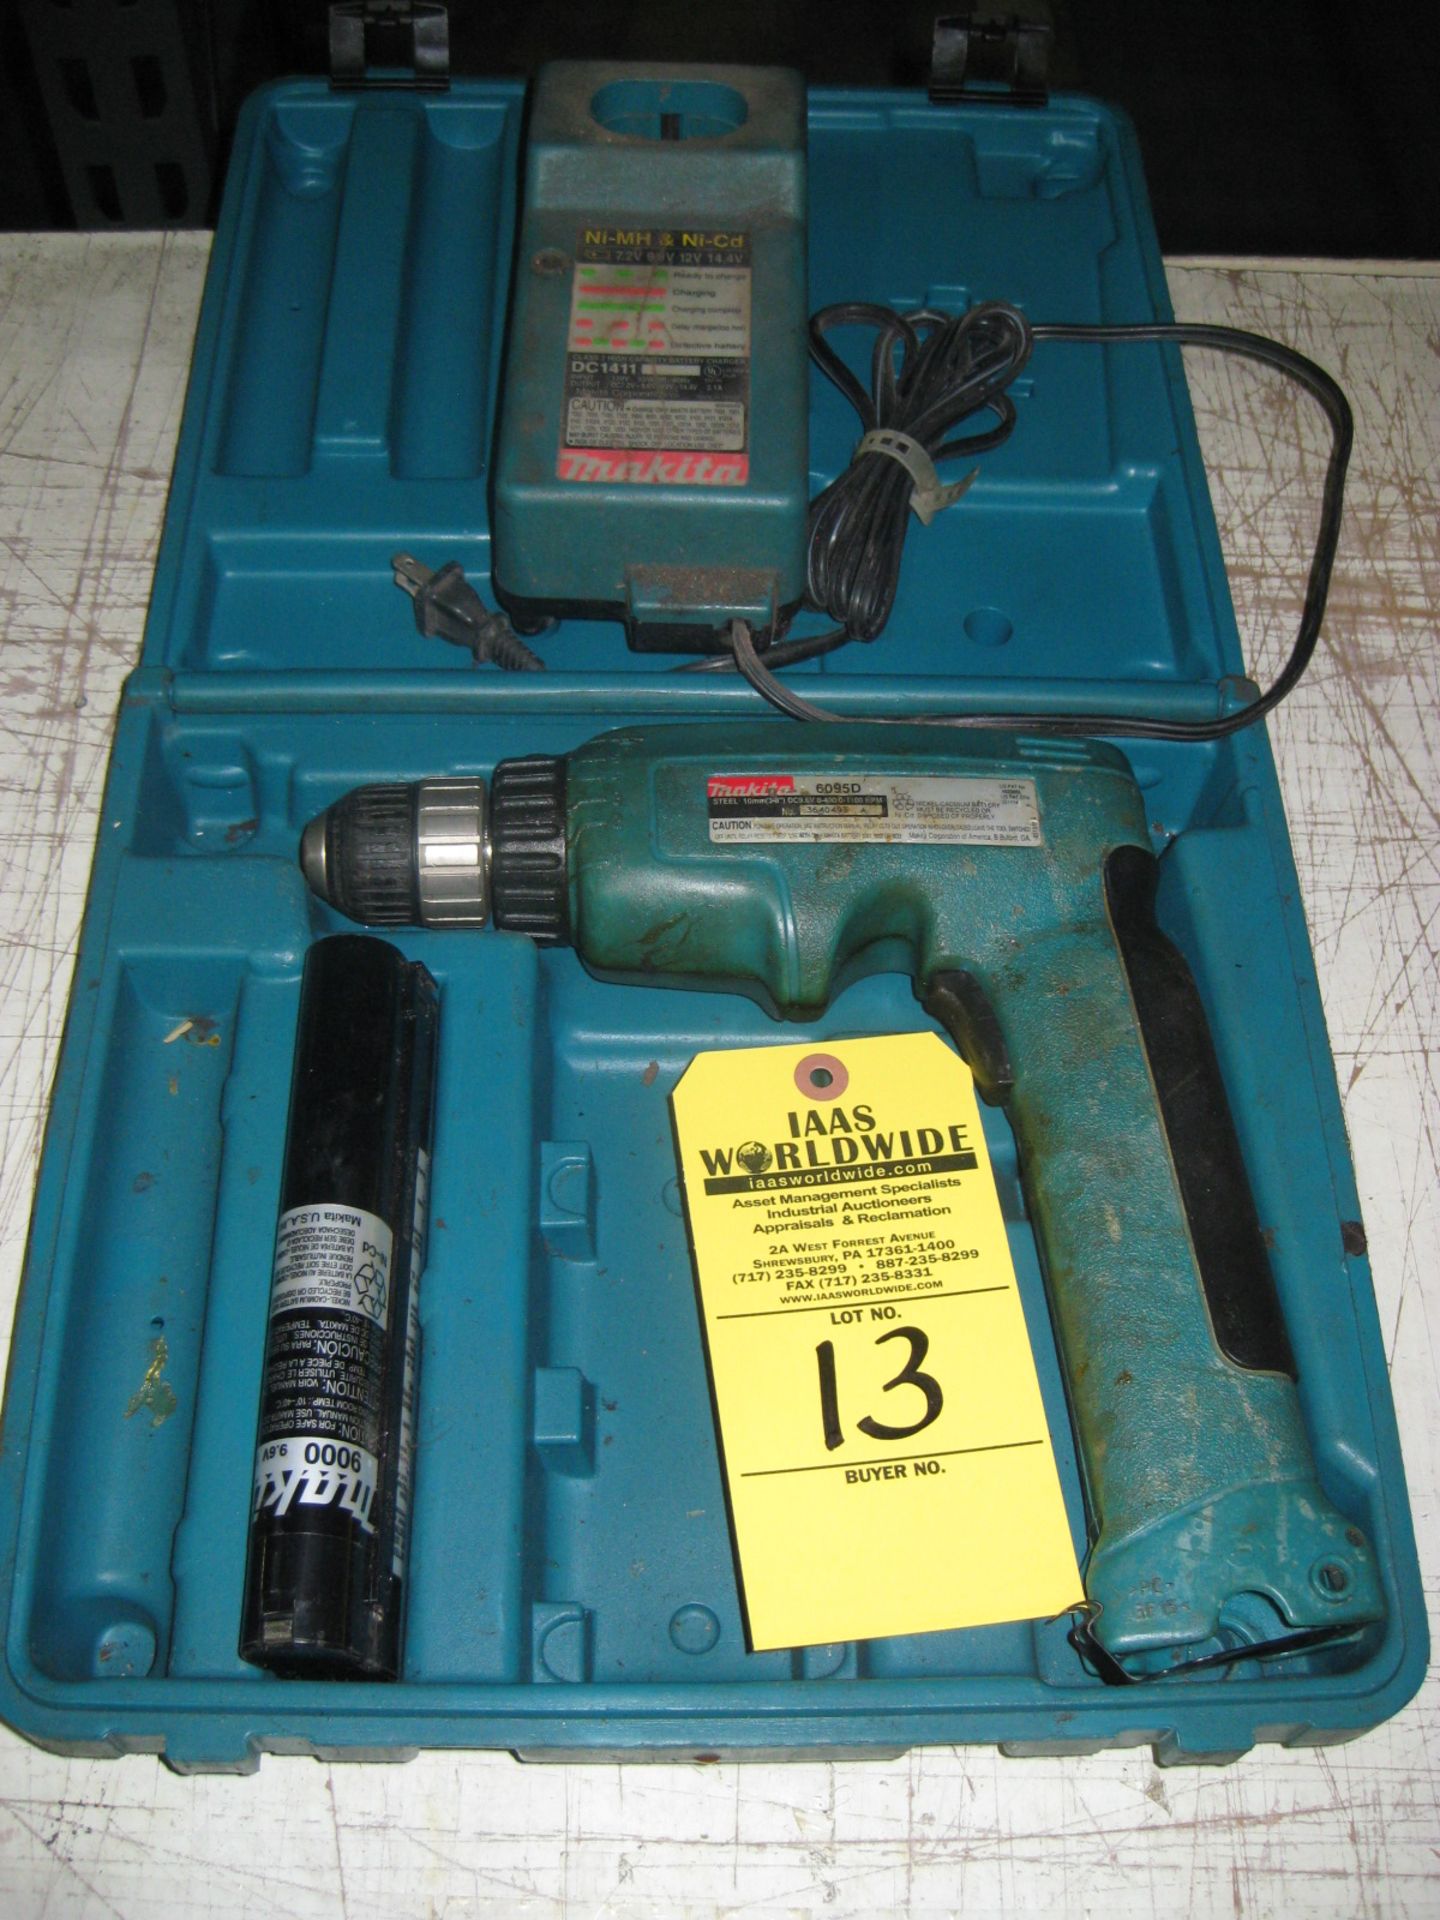 CORDLESS DRILL WITH CHARGER Make: MAKITA Model: 6095D Serial Number: 3640493